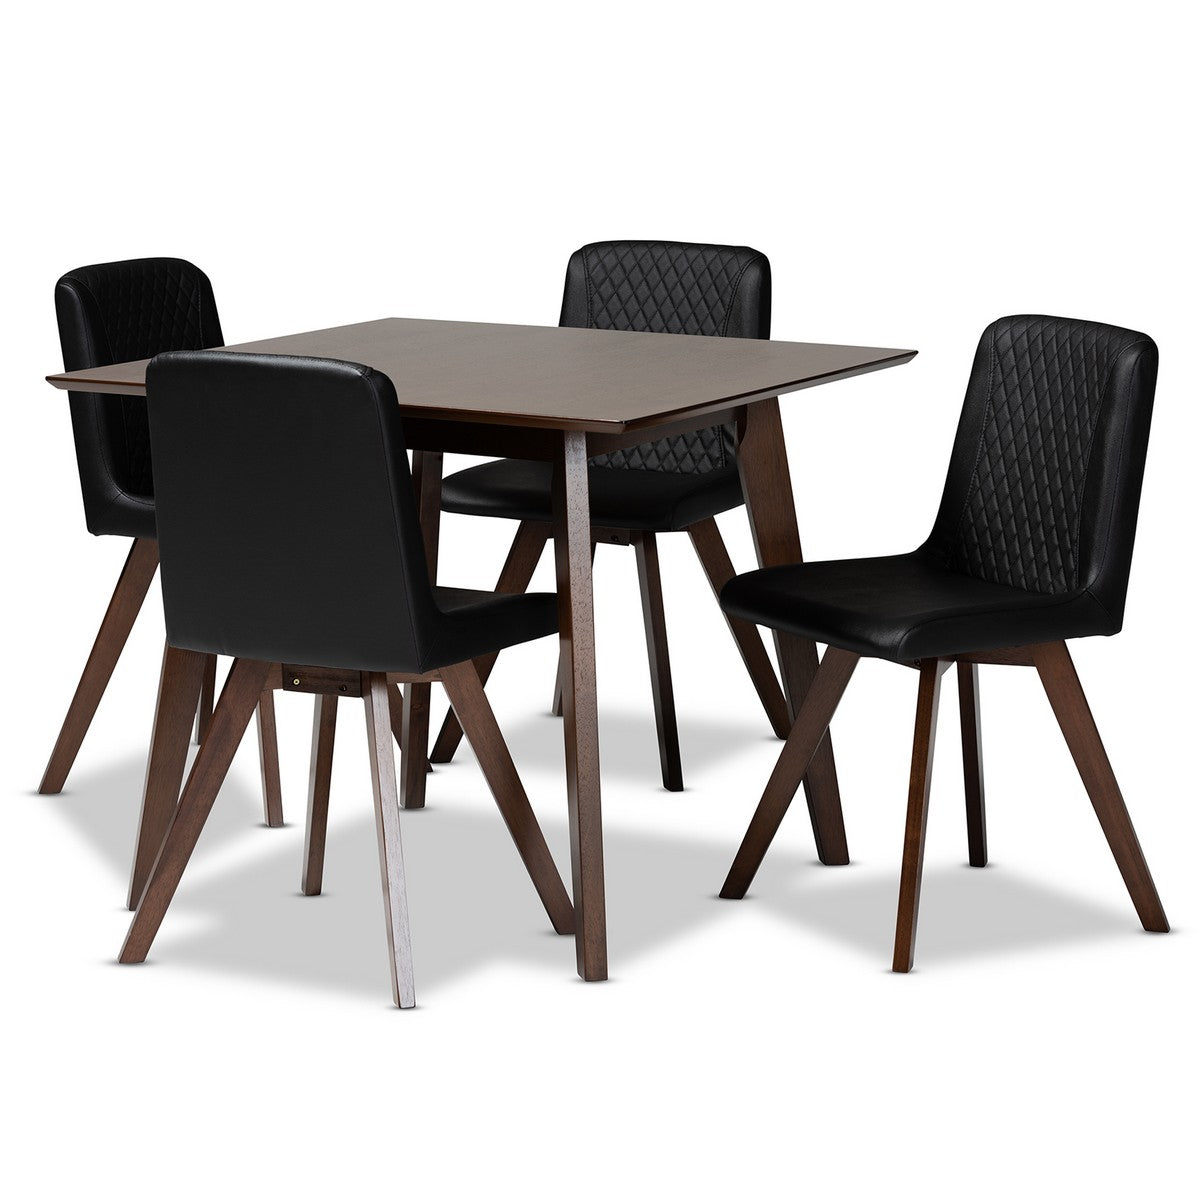 Baxton Studio Pernille Modern Transitional Black Faux Leather Upholstered Walnut Finished Wood 5-Piece Dining Set Baxton Studio-Dining Sets-Minimal And Modern - 1